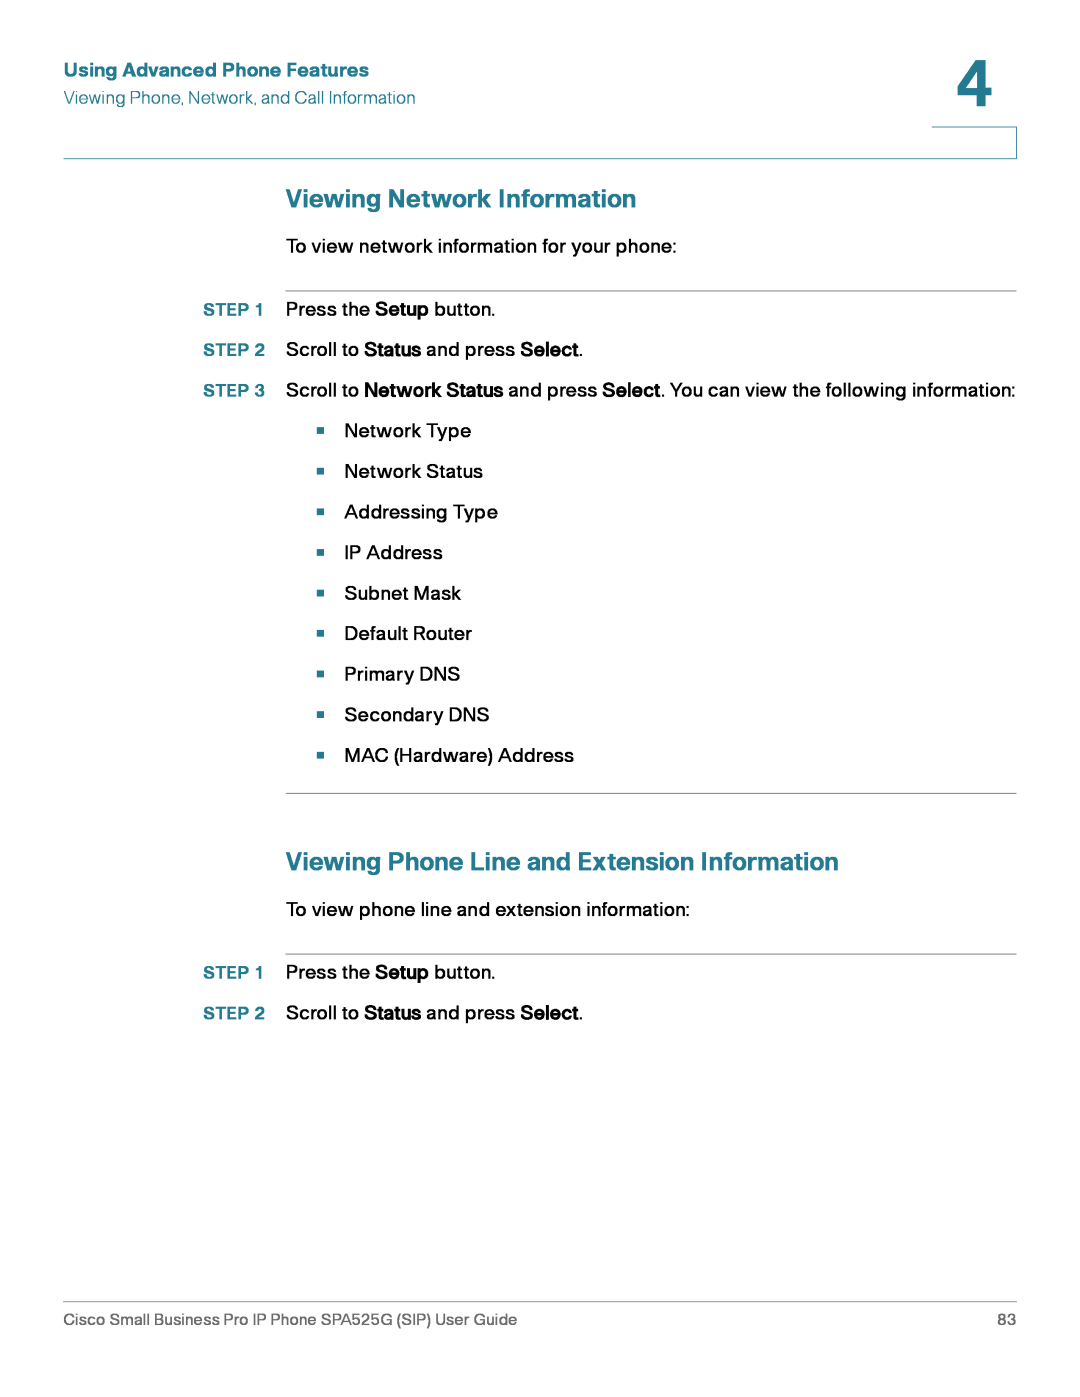 Cisco Systems SPA525G manual Viewing Network Information, Viewing Phone Line and Extension Information 